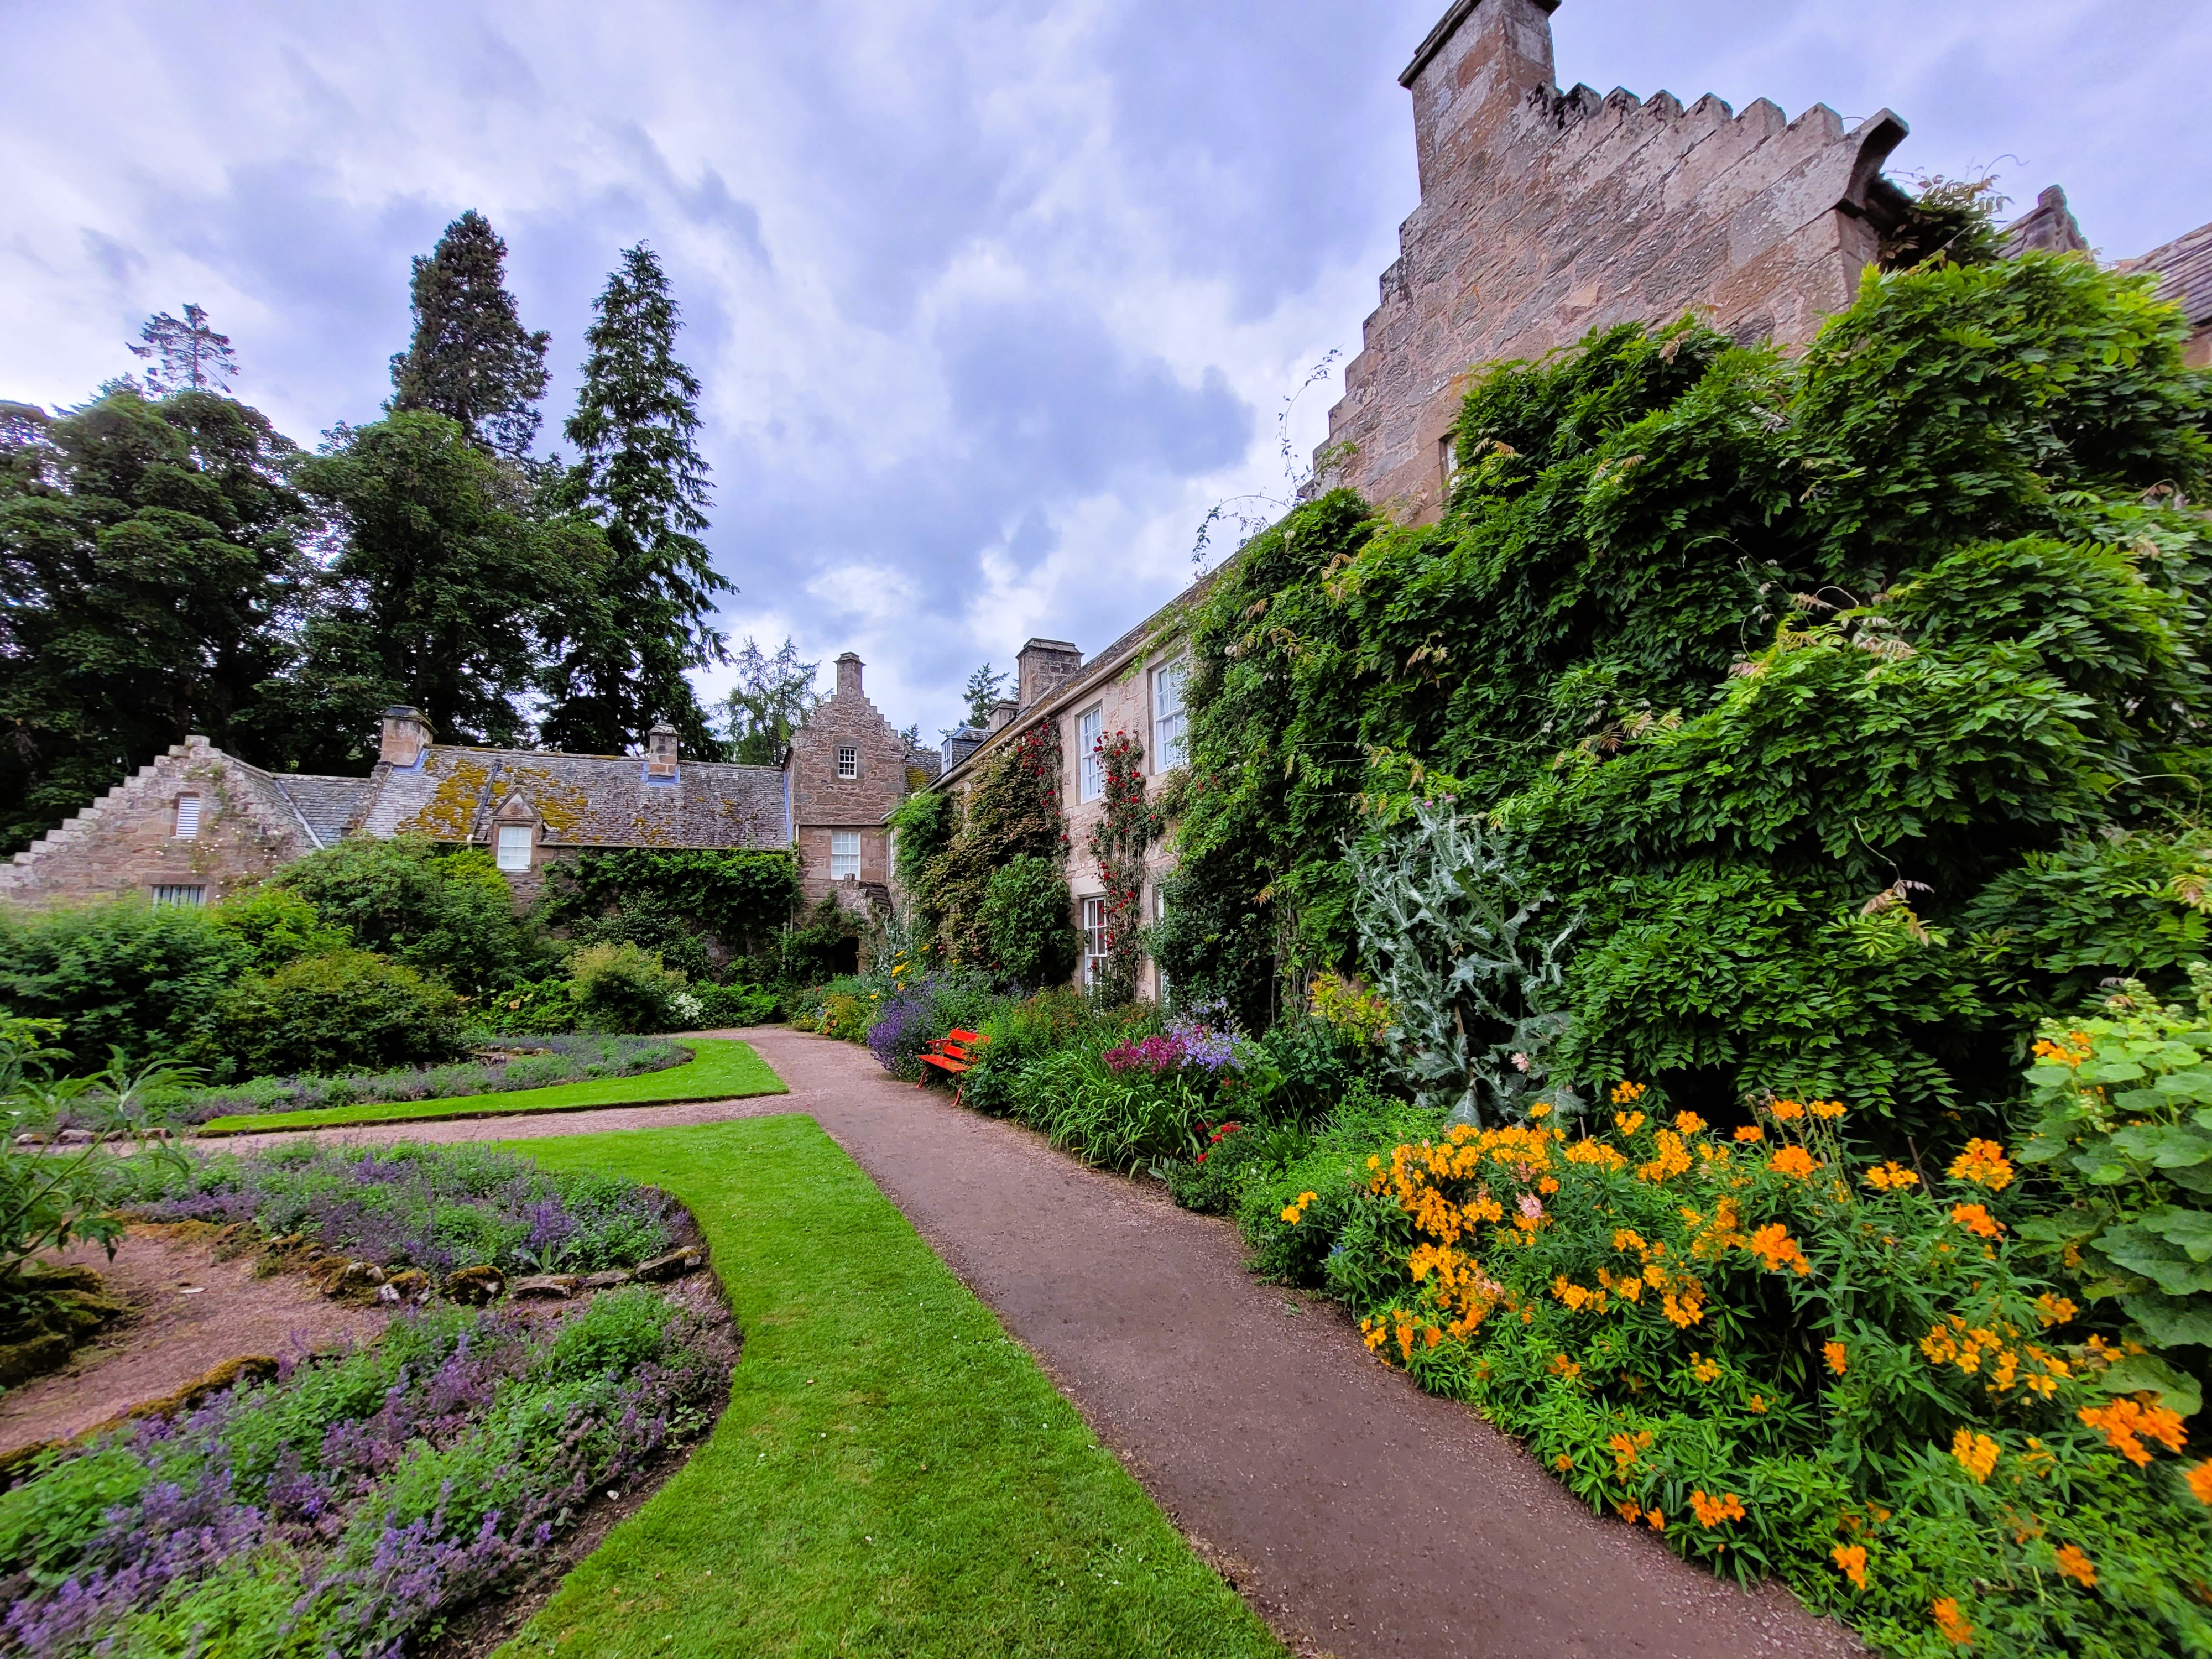 The stunning gardens of Cawdor Castle only a 30 minute drive away